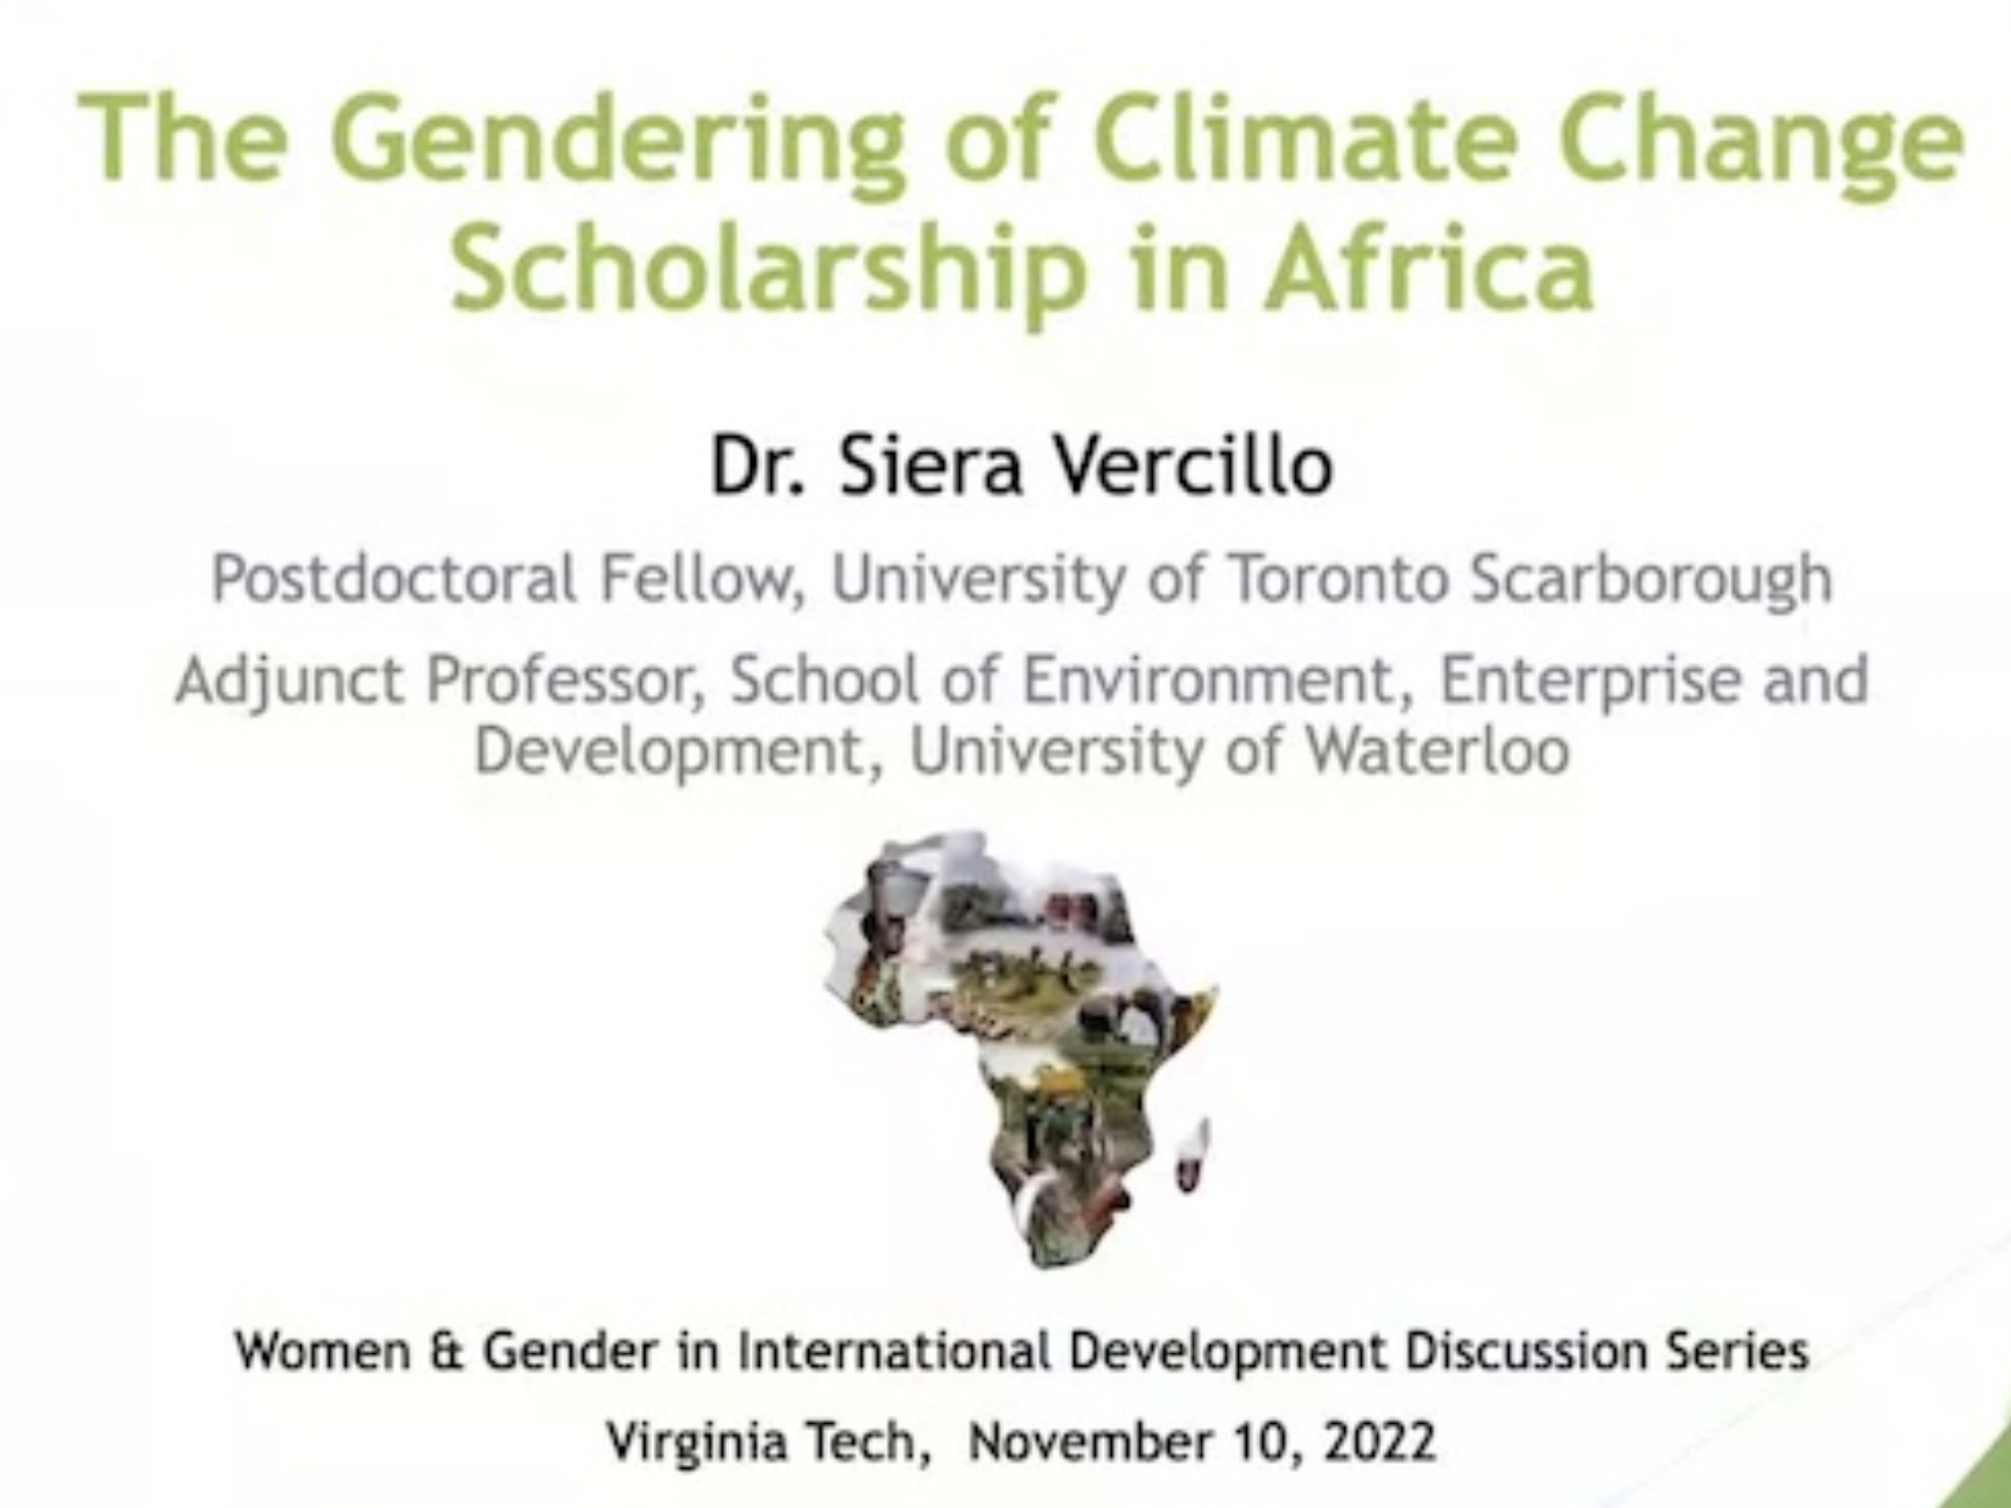 The Gendering of Climate Change in Africa